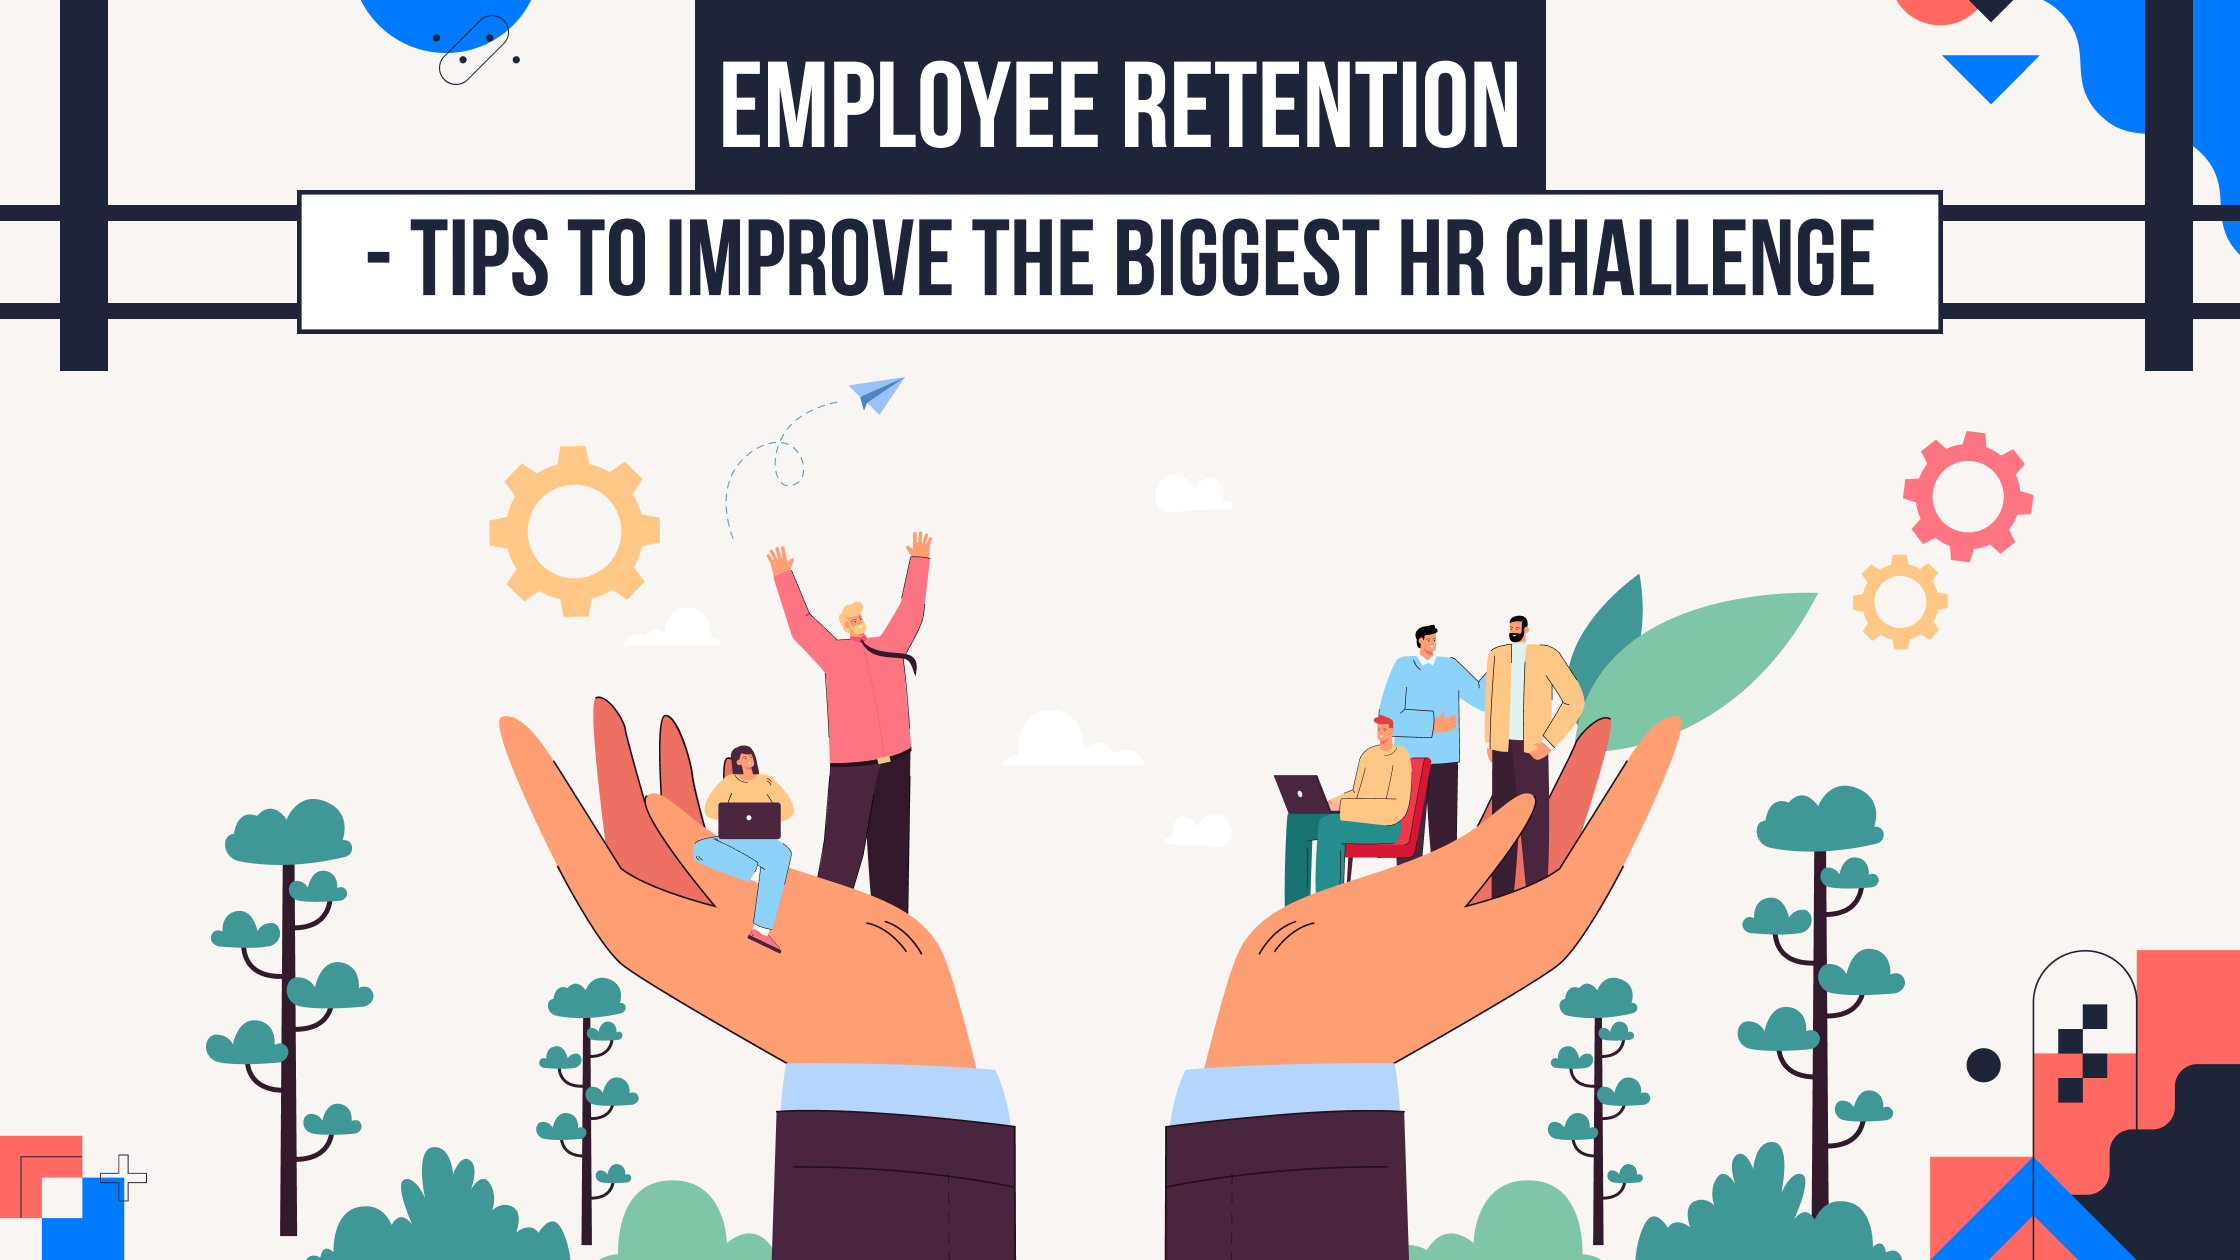 Employee Retention Tips to Improve the Biggest HR Challenge